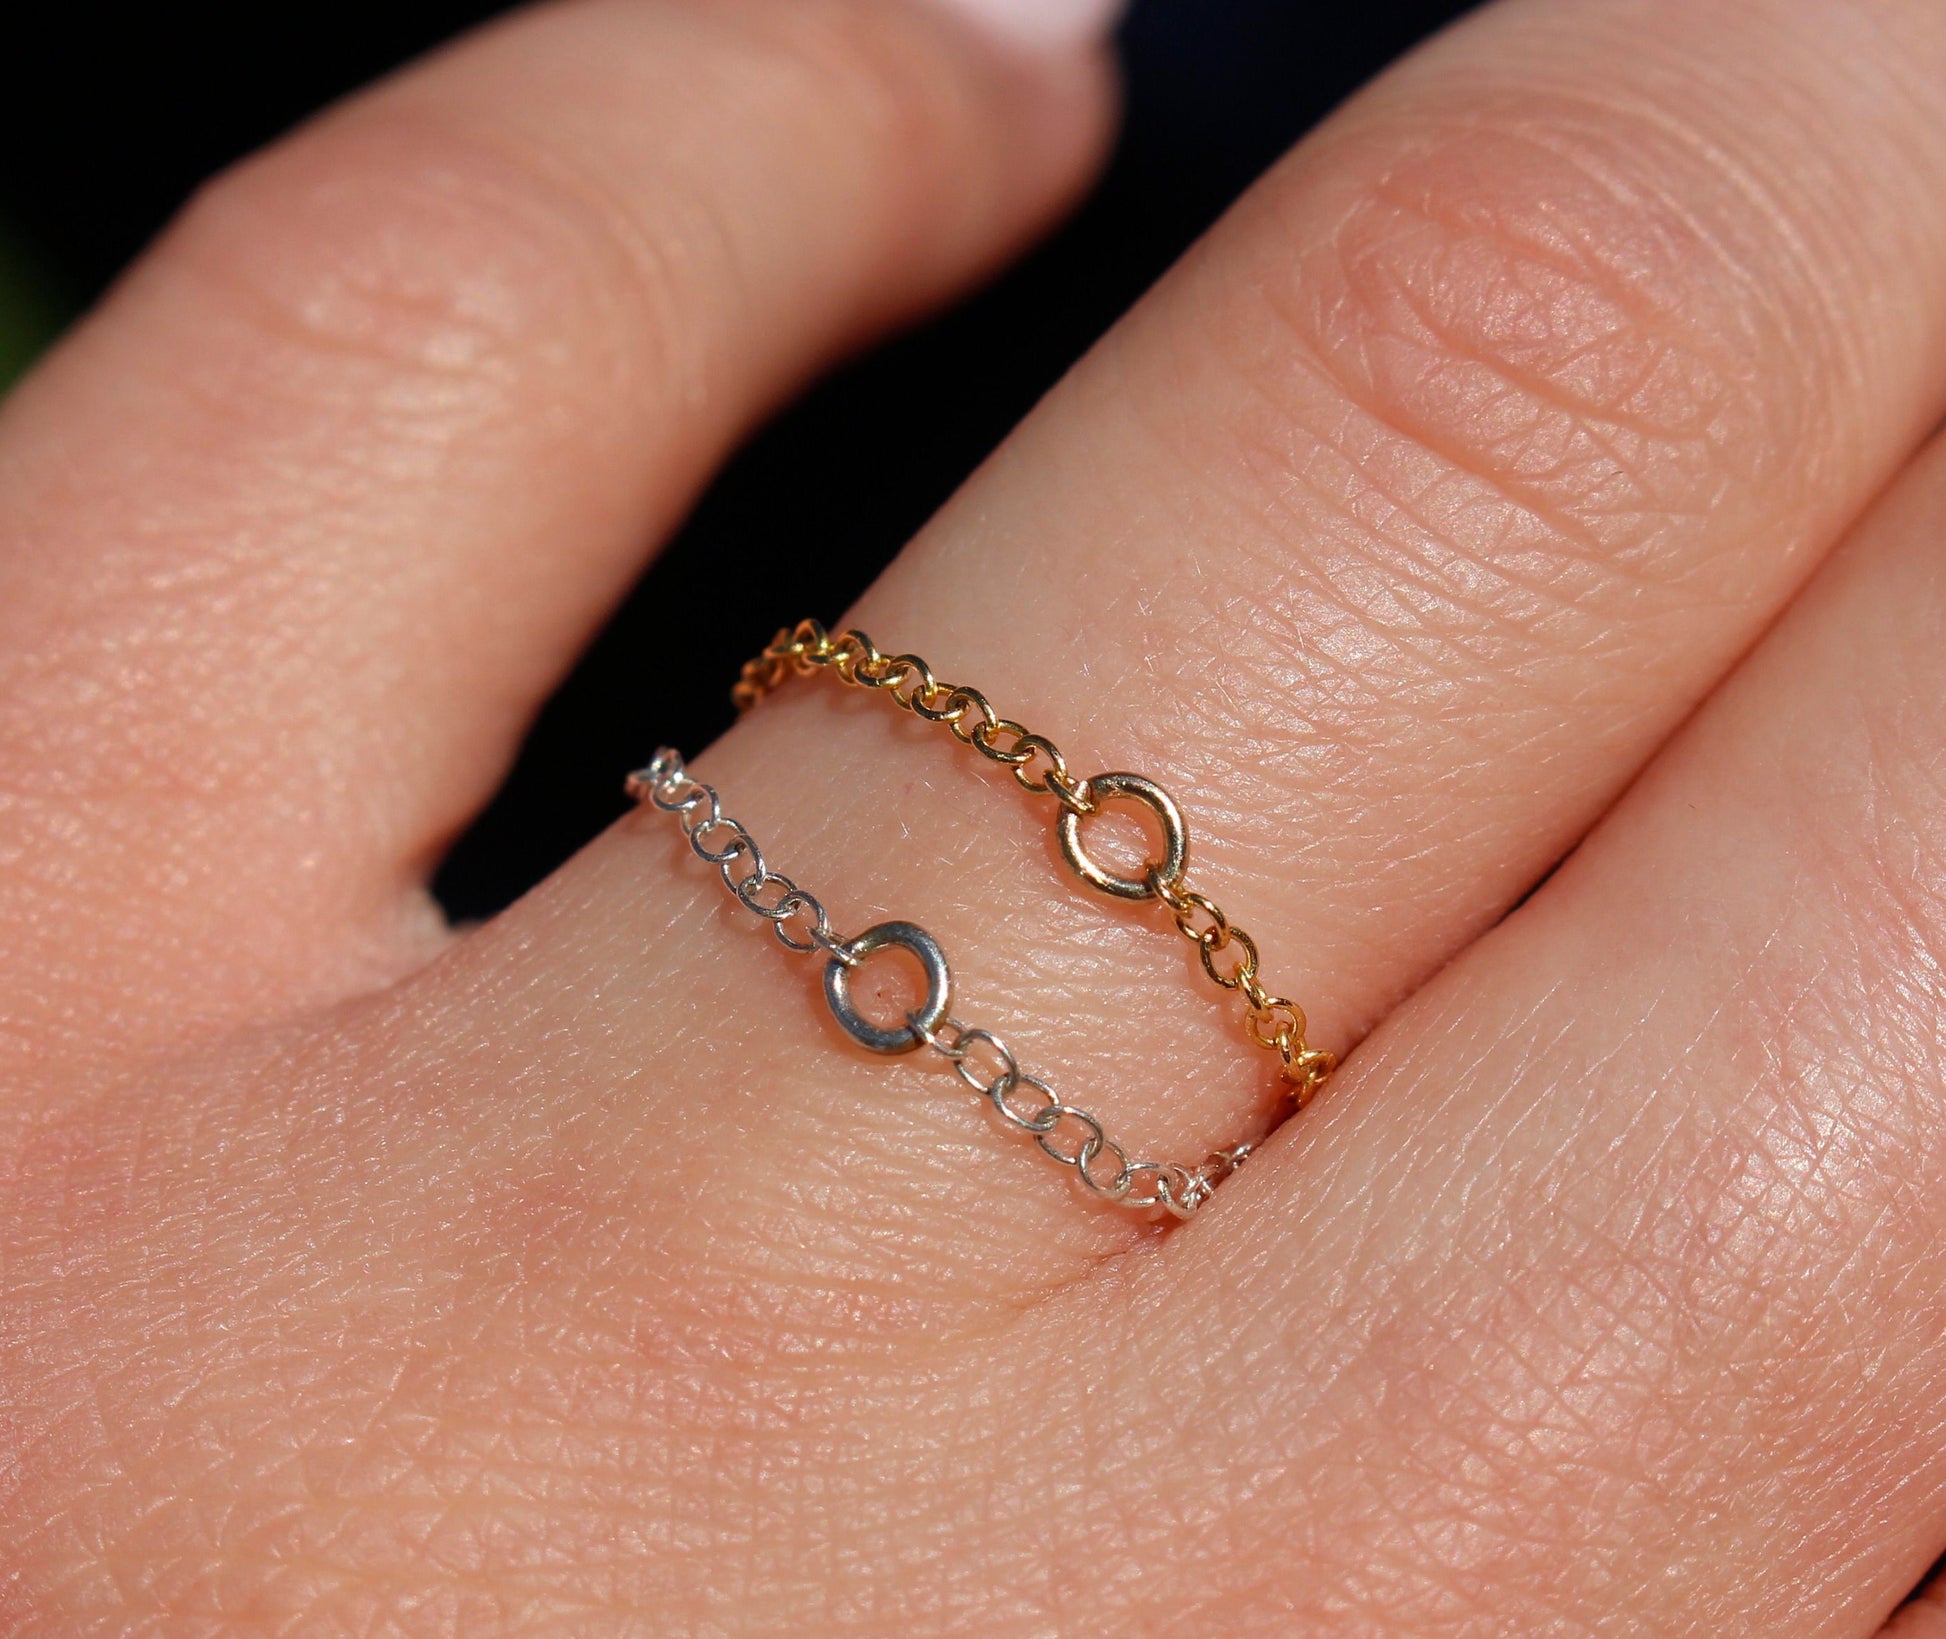 Delicate Chain Ring Available in Sterling Silver and 14k Gold Fill, Reversible Ring, Stackable Ring